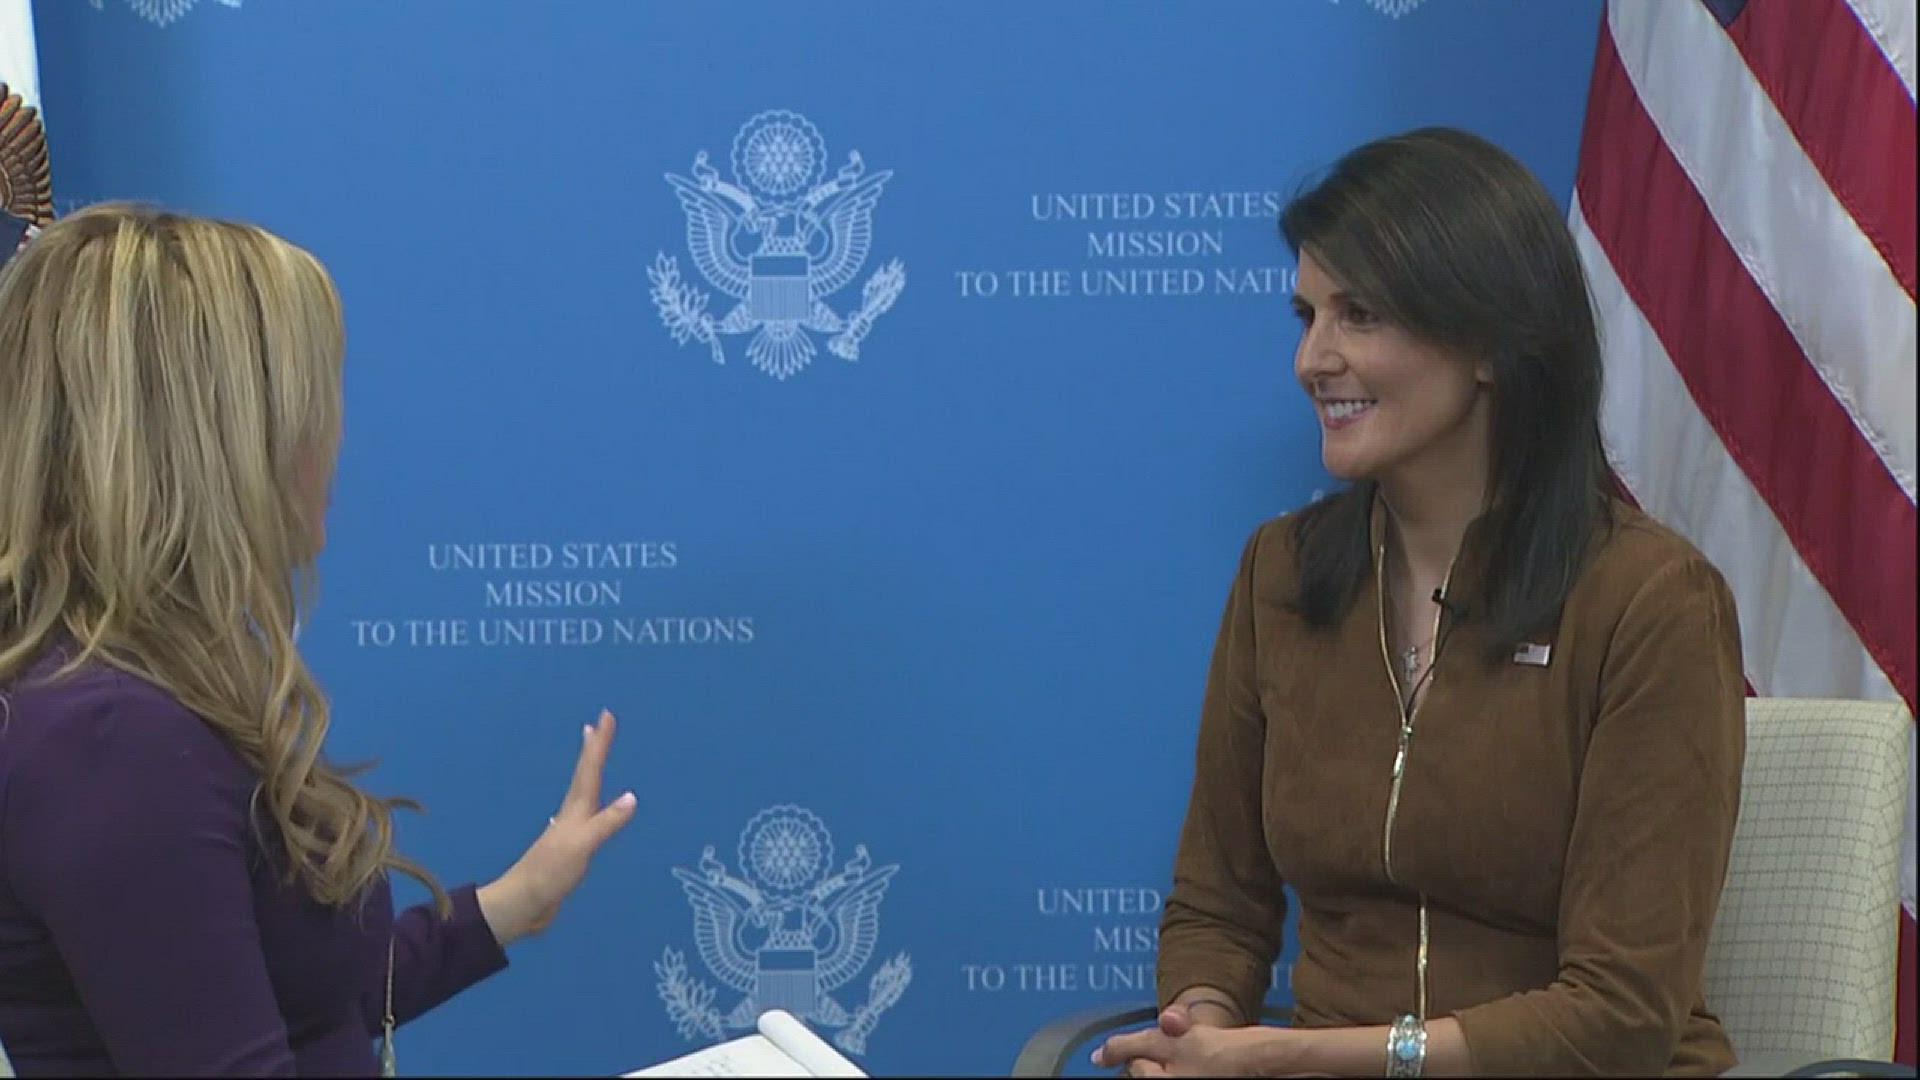 United Nations Ambassador and former South Carolina Governor Nikki Haley sat down with News19's Andrea Mock on Friday to talk about the latest UN Security Council meeting, her first year as an ambassador and what her expectations are moving forward.